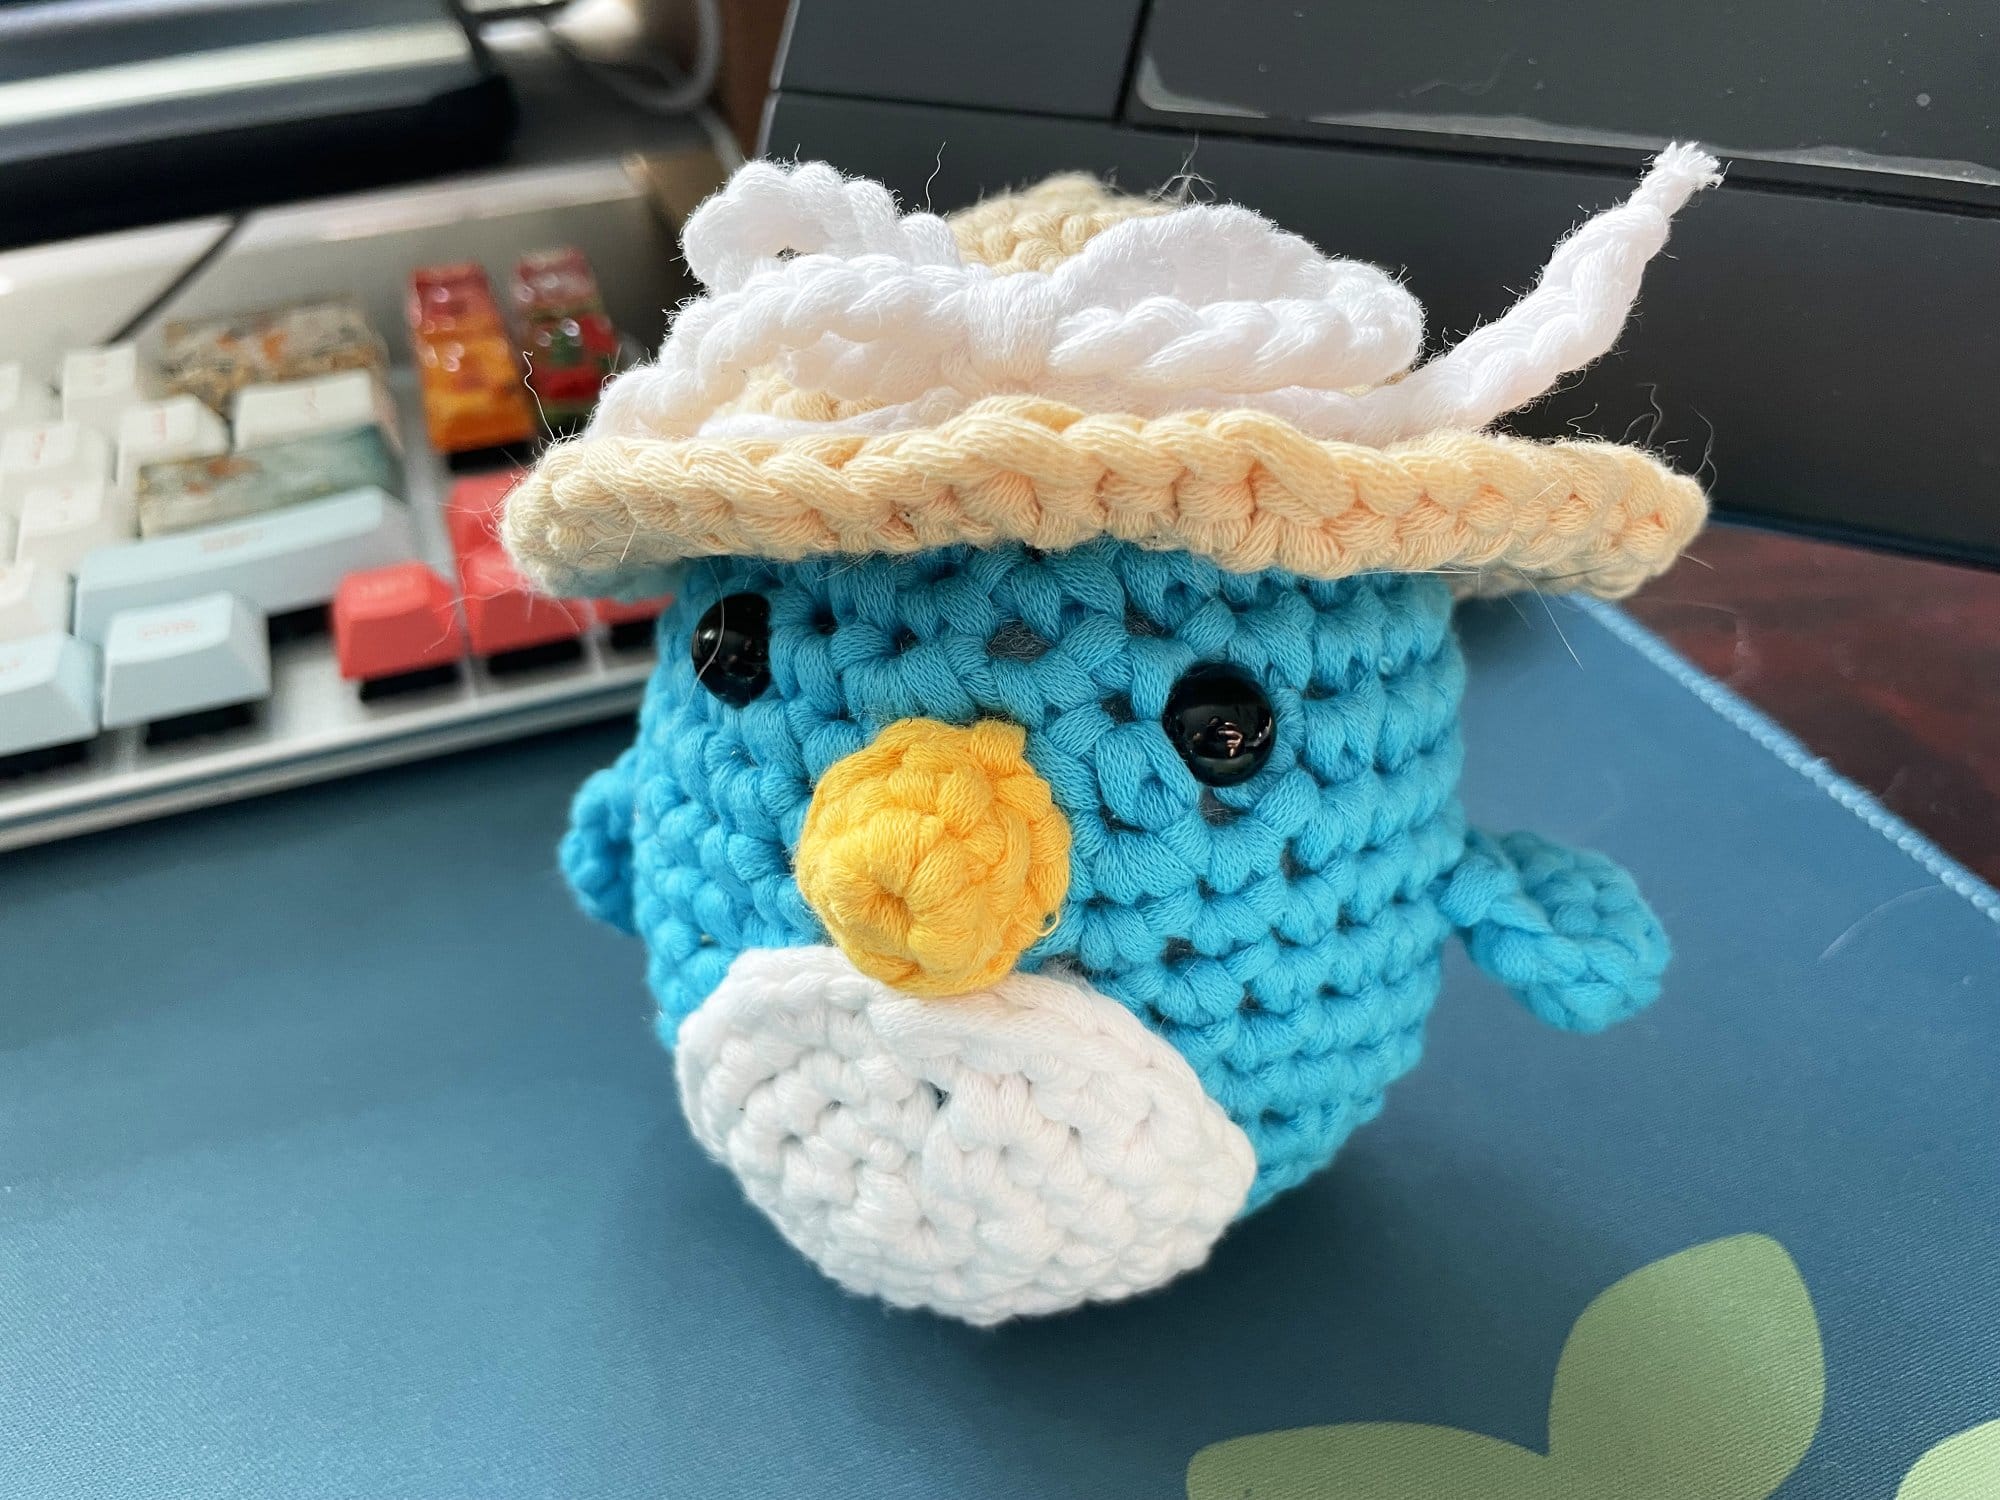 A handcrafted, crochet blue bird wearing a hat, with button eyes and a yellow beak, sitting on a desk